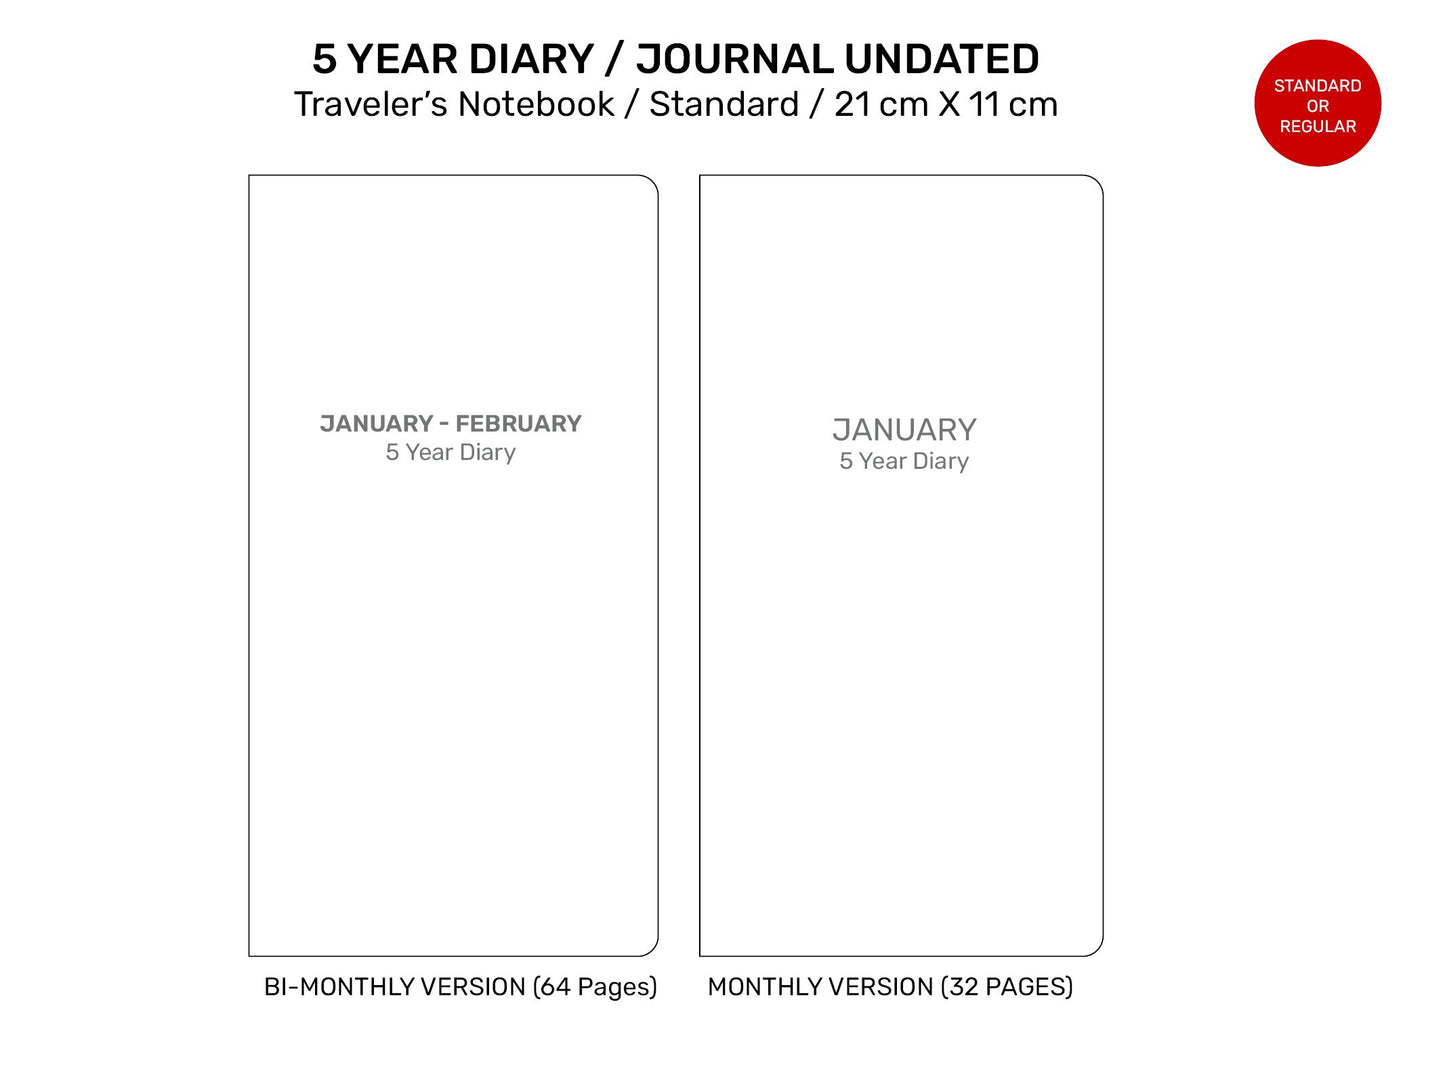 5 YEAR JOURNAL DIARY Traveler's Notebook Standard Size - Printable Refill Grid - Minimalist Functional